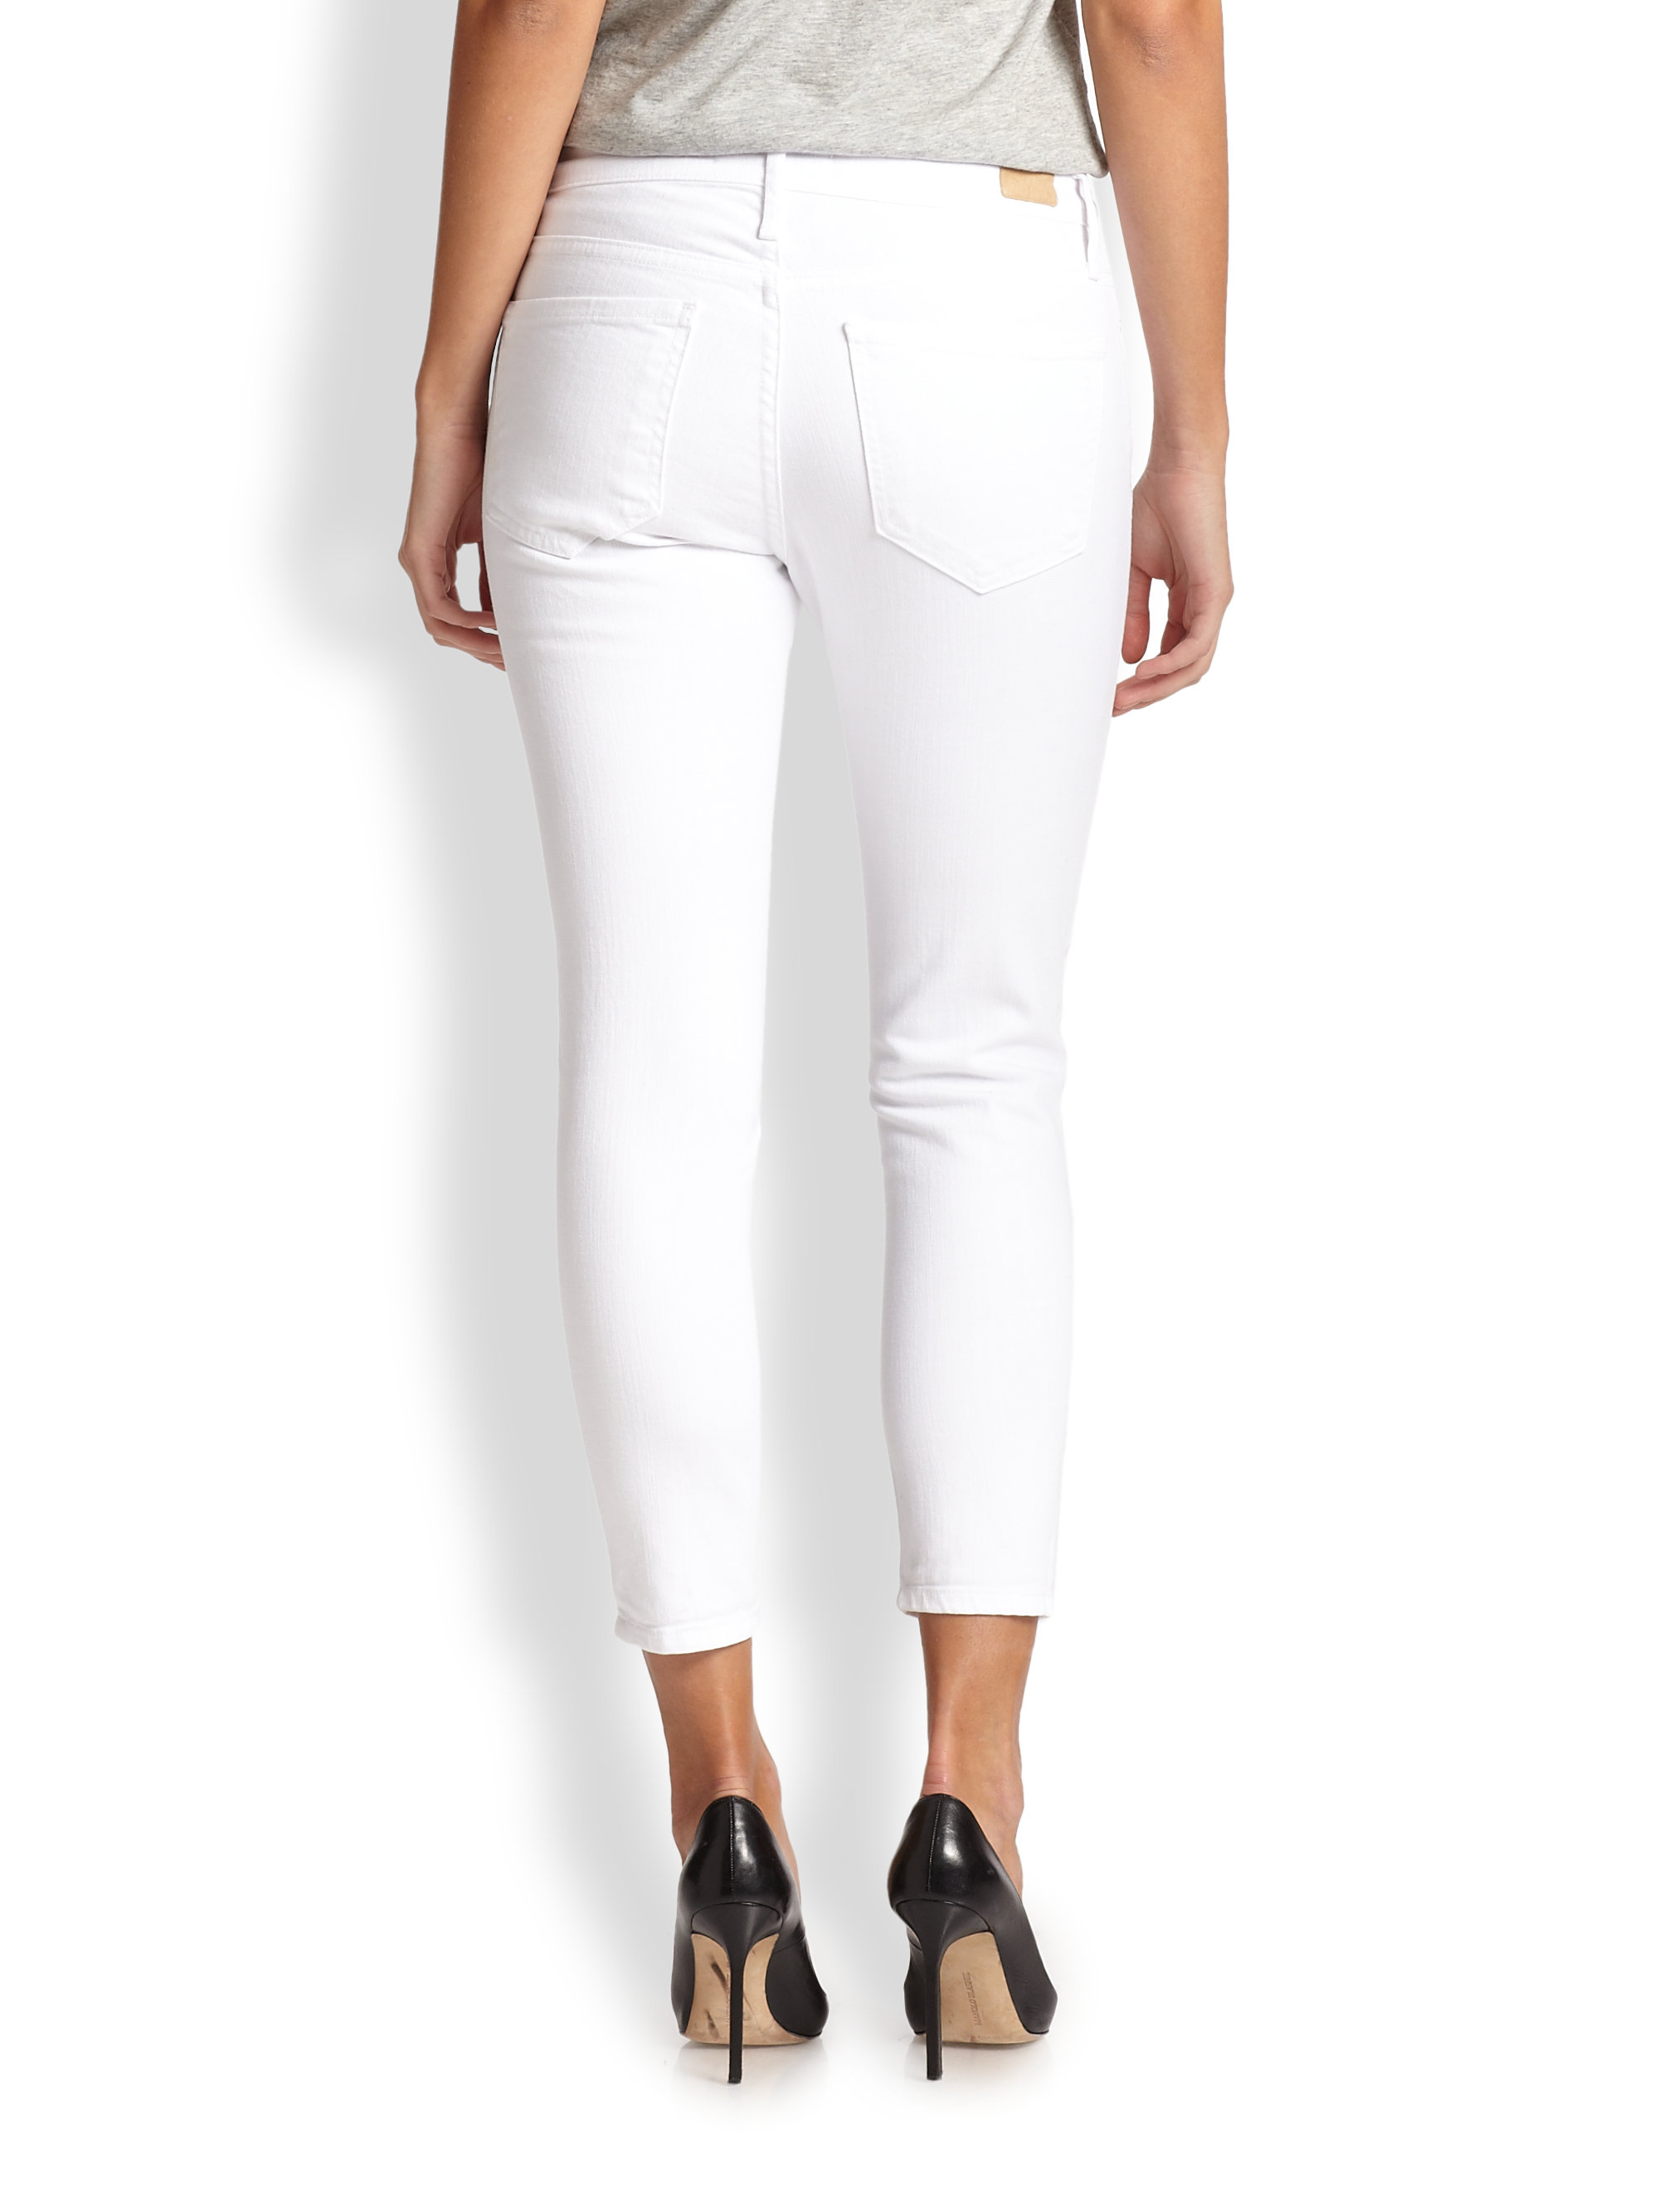 Joie Skinny Cropped Jeans in White - Lyst